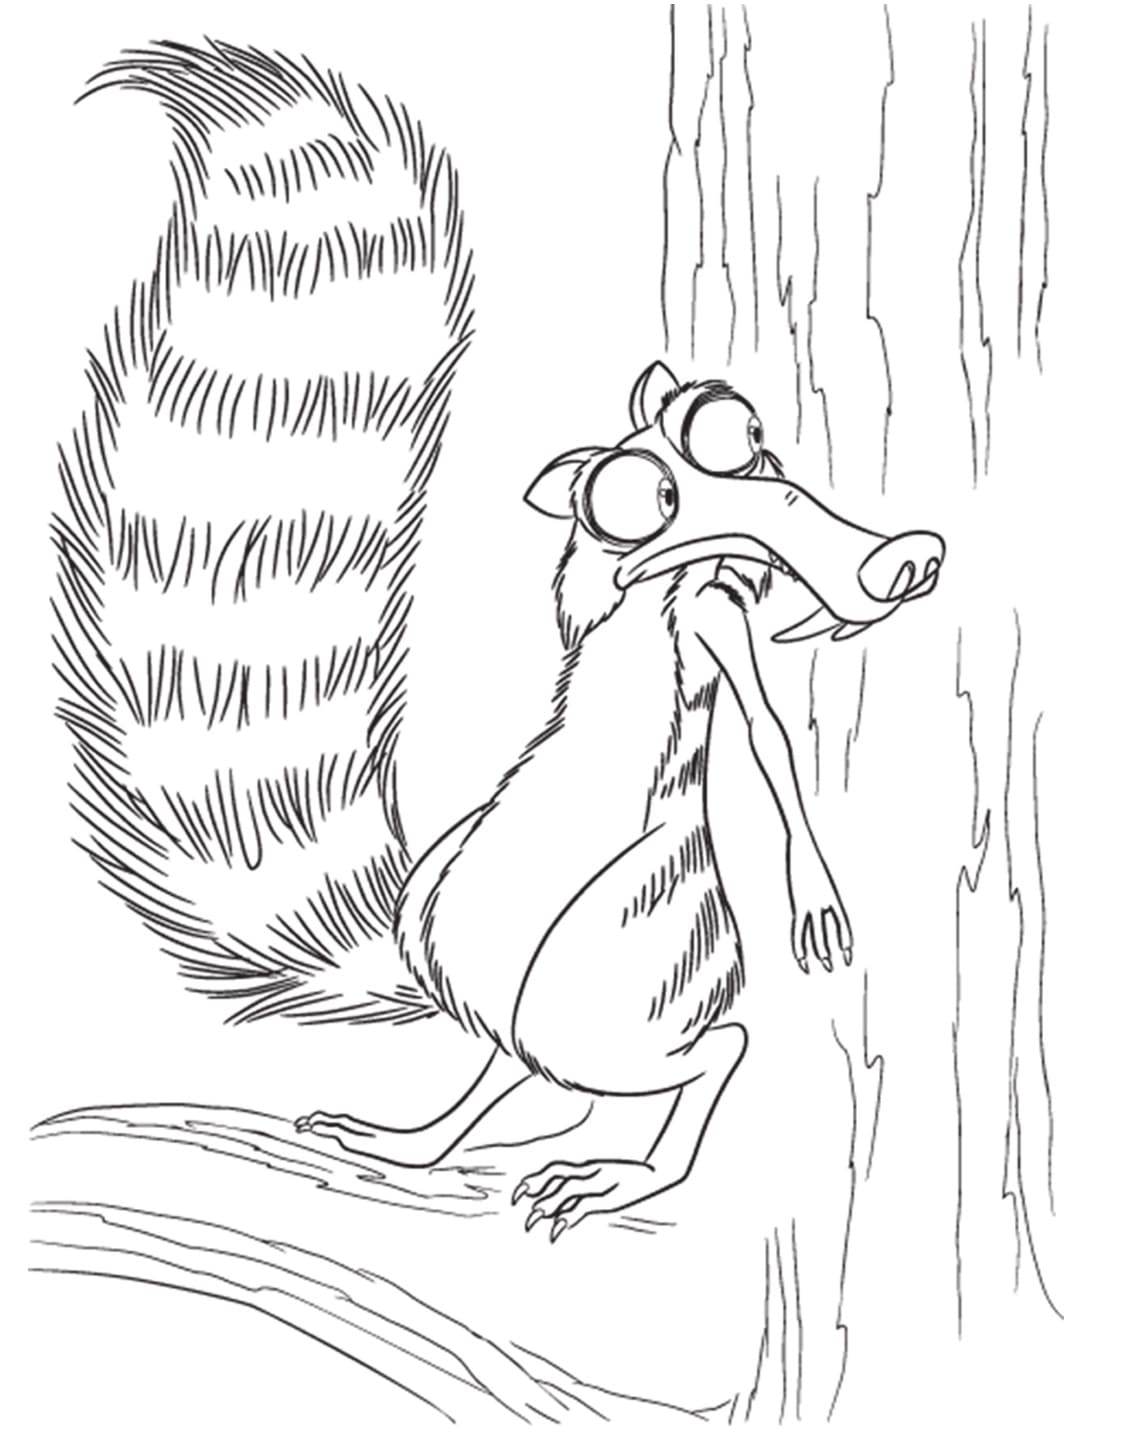 Scrat from Ice Age Coloring Page - Free Printable Coloring Pages for Kids